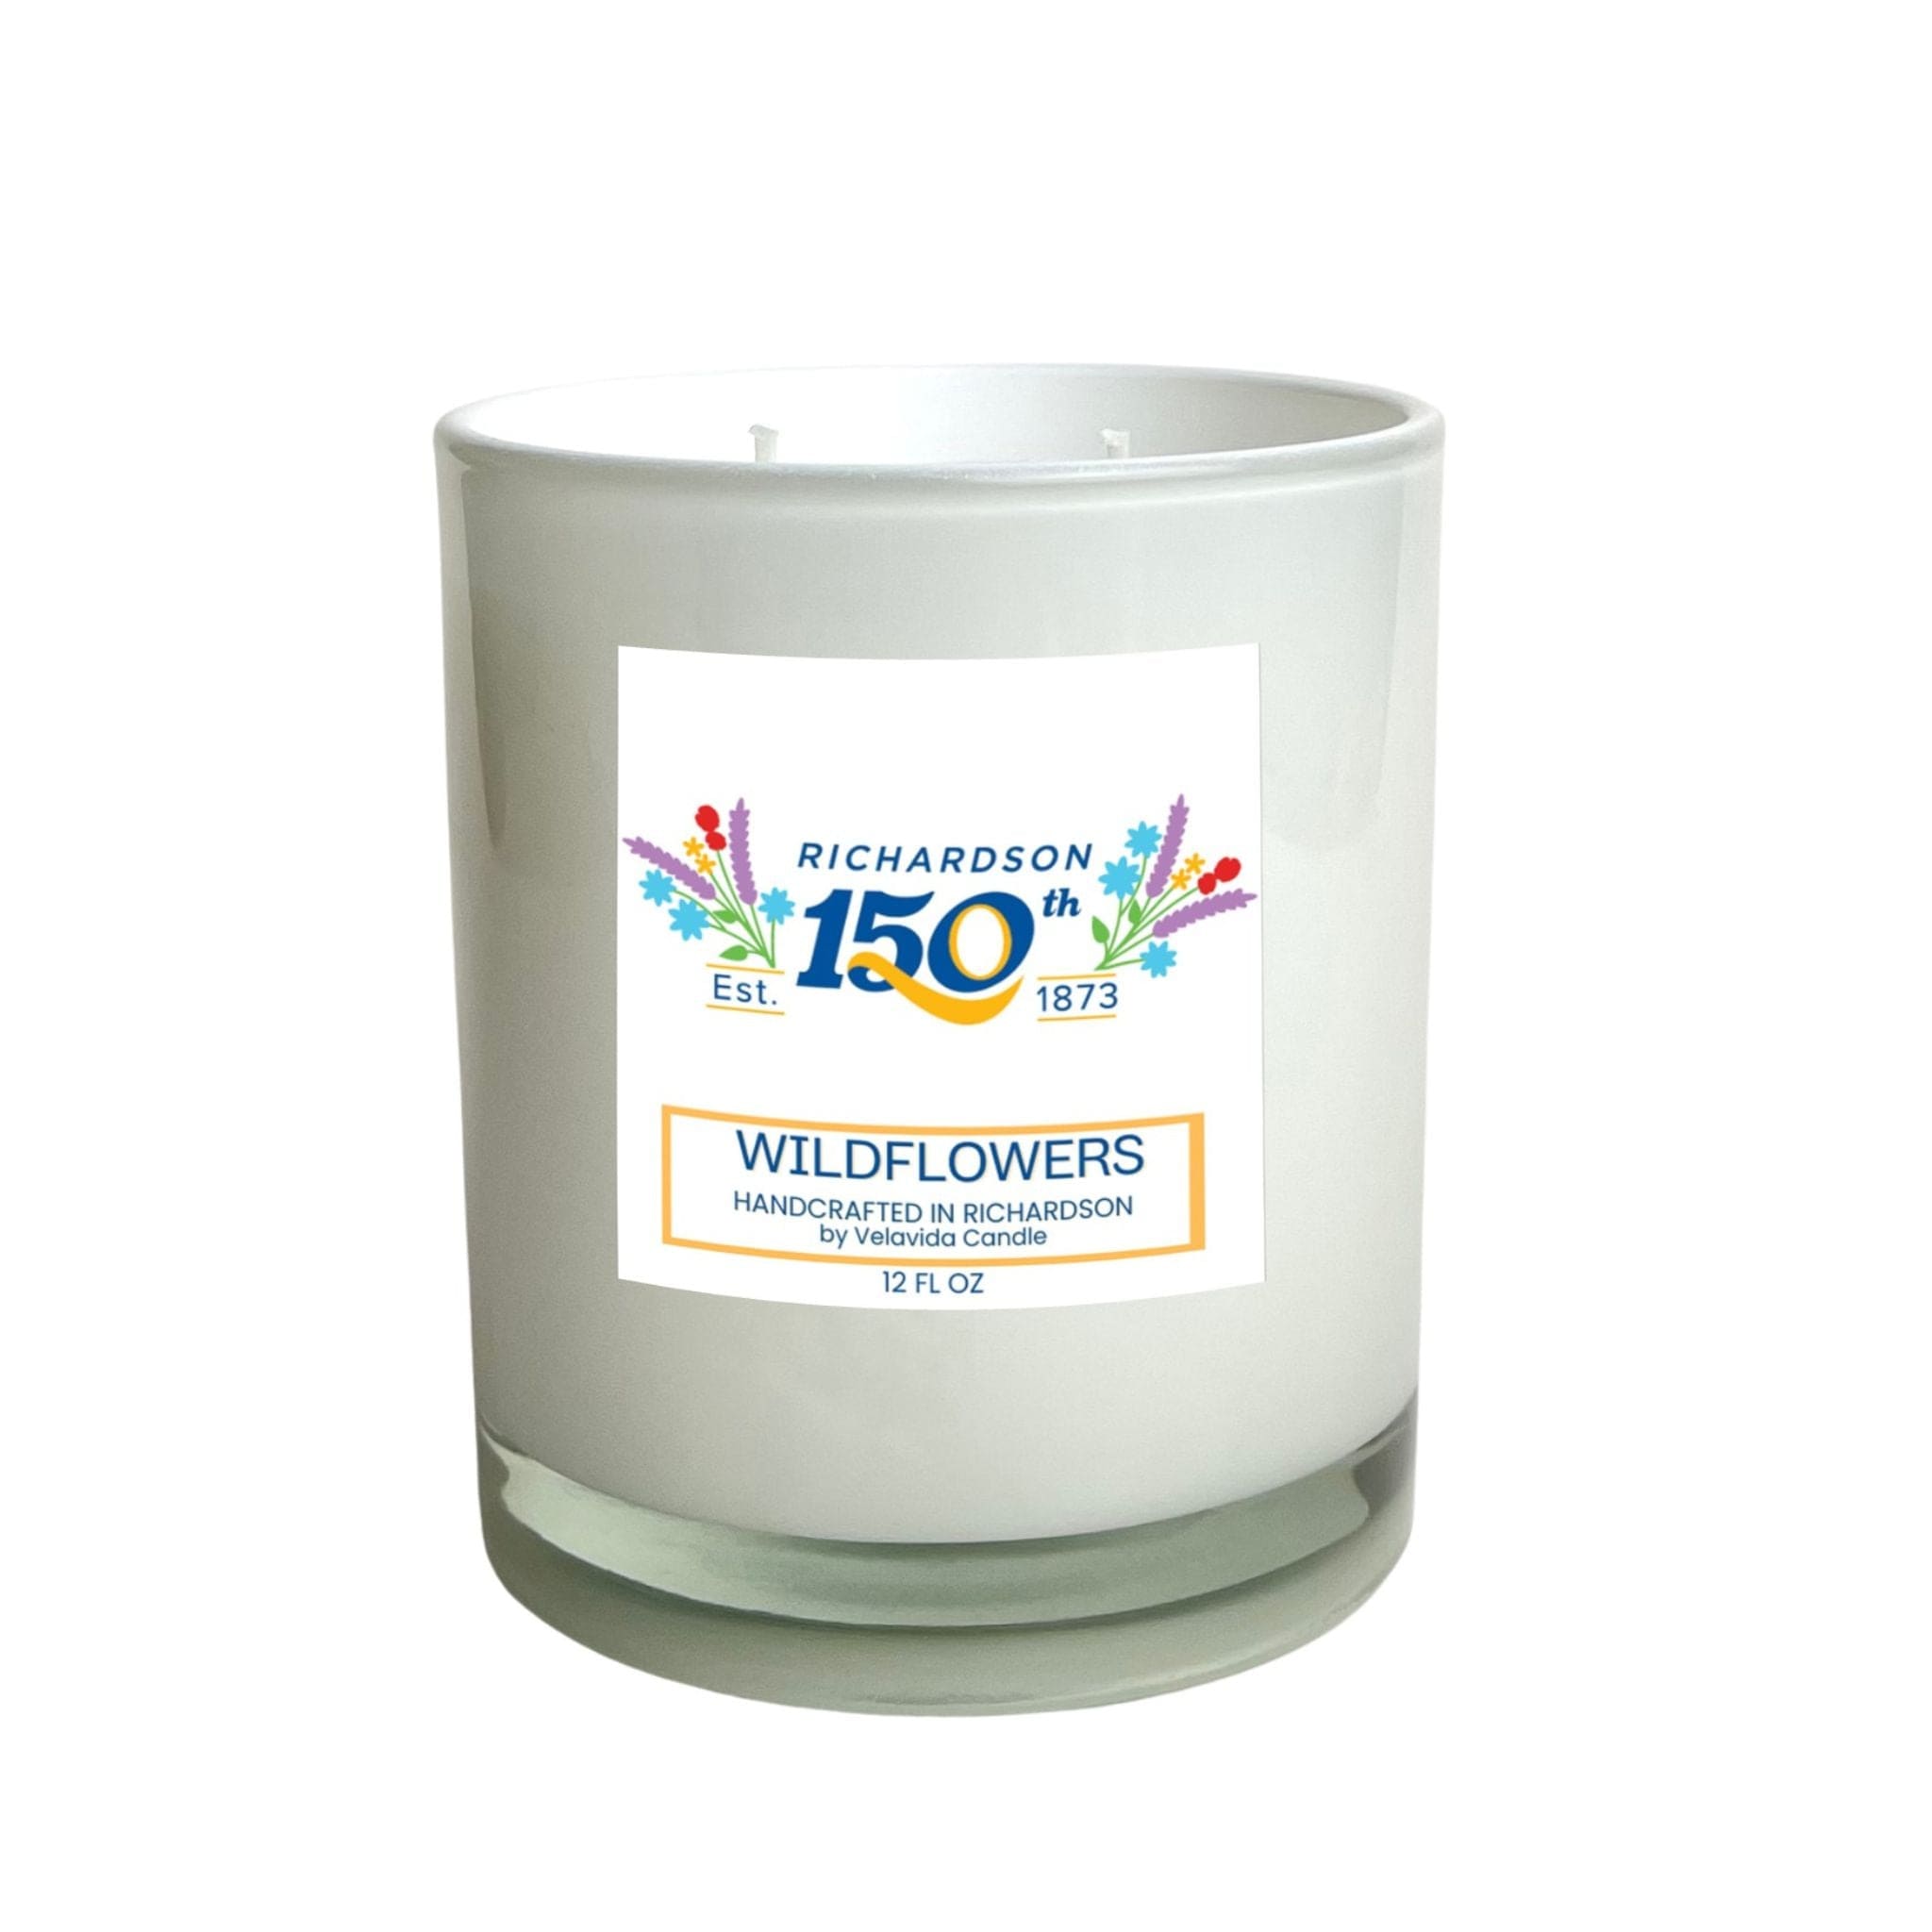 Private Label by Velavida Candles 12 Oz Richardson 150 Anniversary Wholesale Candles